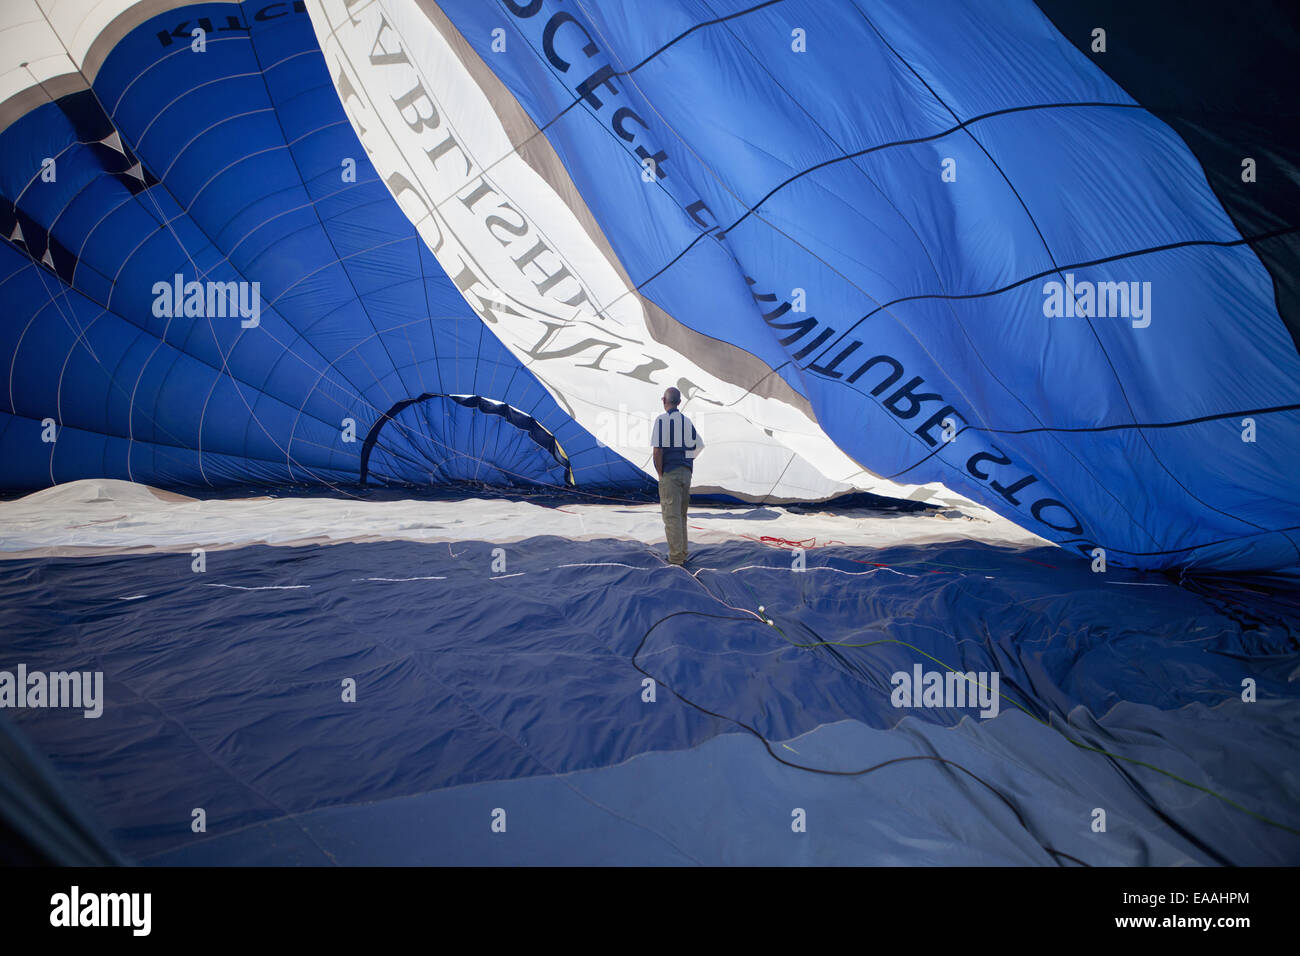 Man standing inside a partially inflated hot air balloon. Stock Photo